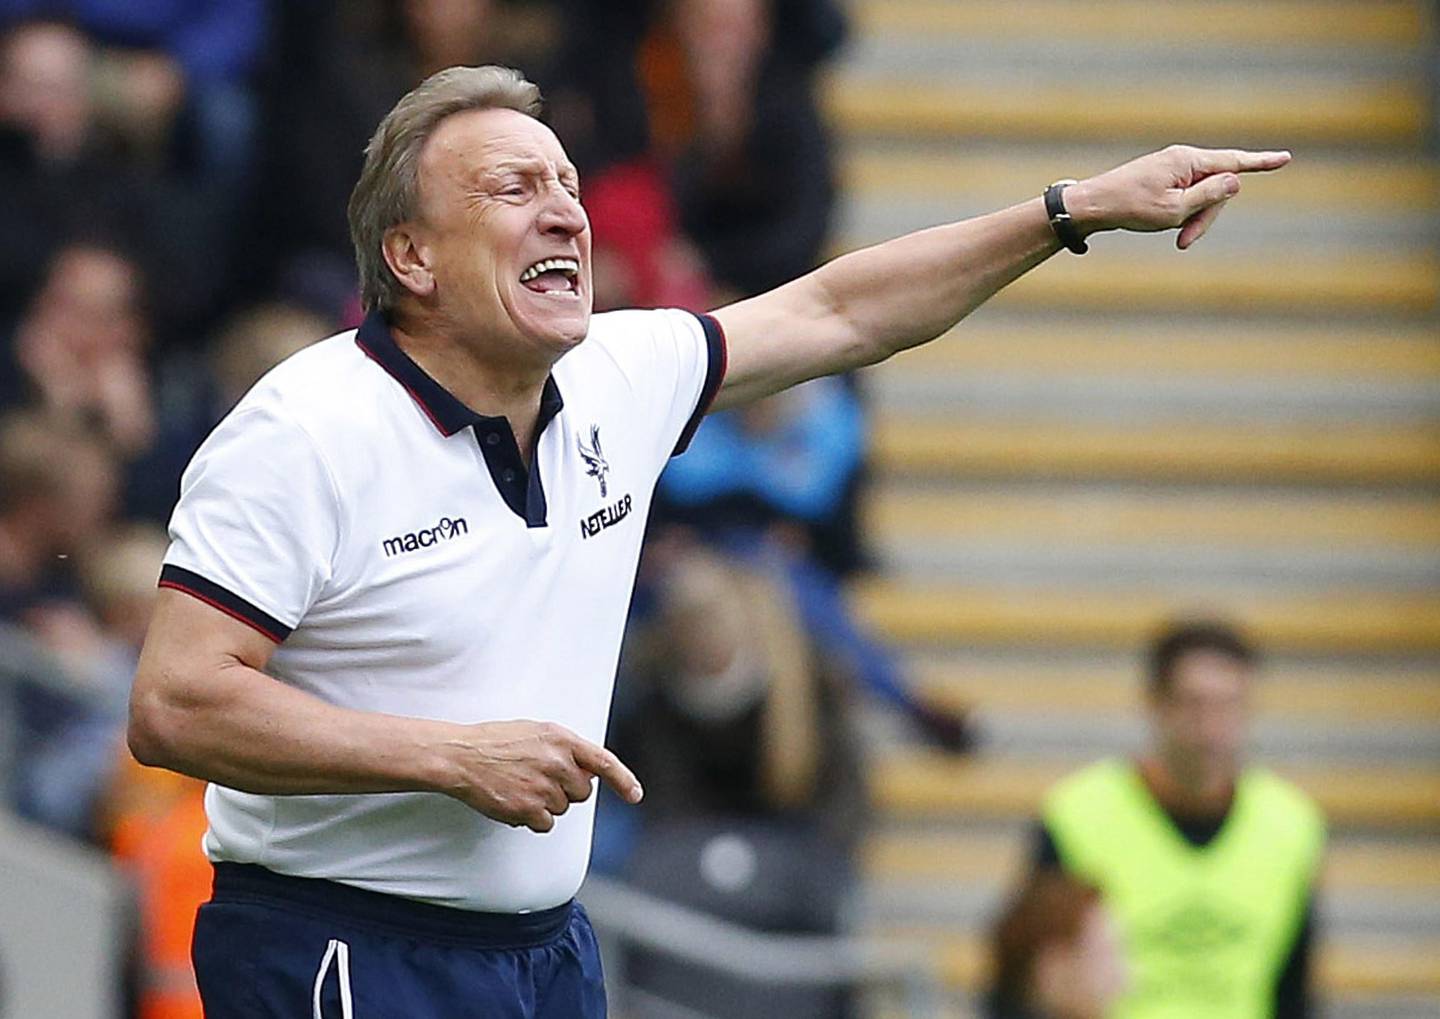 (FILES) In a file picture taken on October 4, 2014 Crystal Palace's English manager Neil Warnock gestures during the English Premier League football match between Hull City and Crystal Palace at the KC Stadium in Kingston upon Hull. Neil Warnock on December 27, 2014 became the first Premier League manager to lose his job this season when he was sacked by strugglers Crystal Palace. AFP PHOTO / LINDSEY PARNABY

RESTRICTED TO EDITORIAL USE. No use with unauthorized audio, video, data, fixture lists, club/league logos or "live" services. Online in-match use limited to 45 images, no video emulation. No use in betting, games or single club/league/player publications.